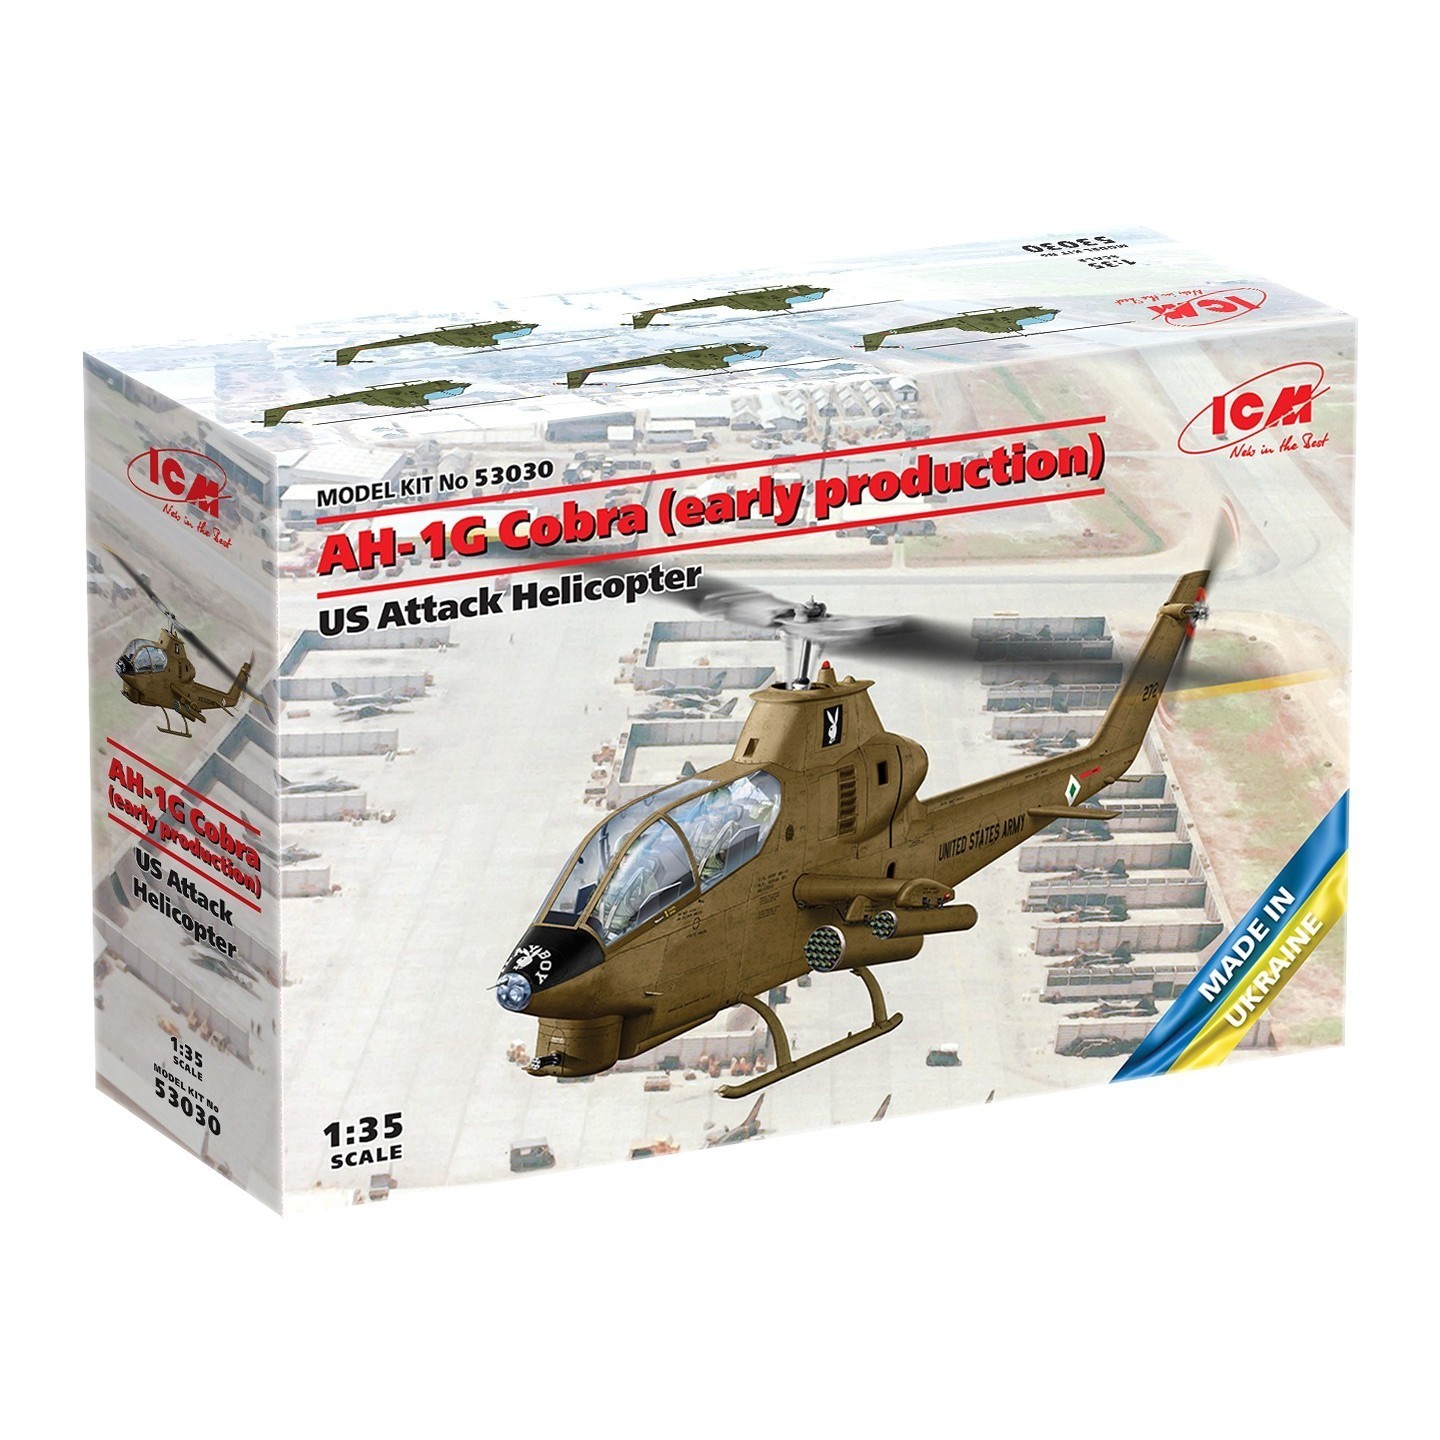 AH-1G Cobra (early production) US Attack Helicopter